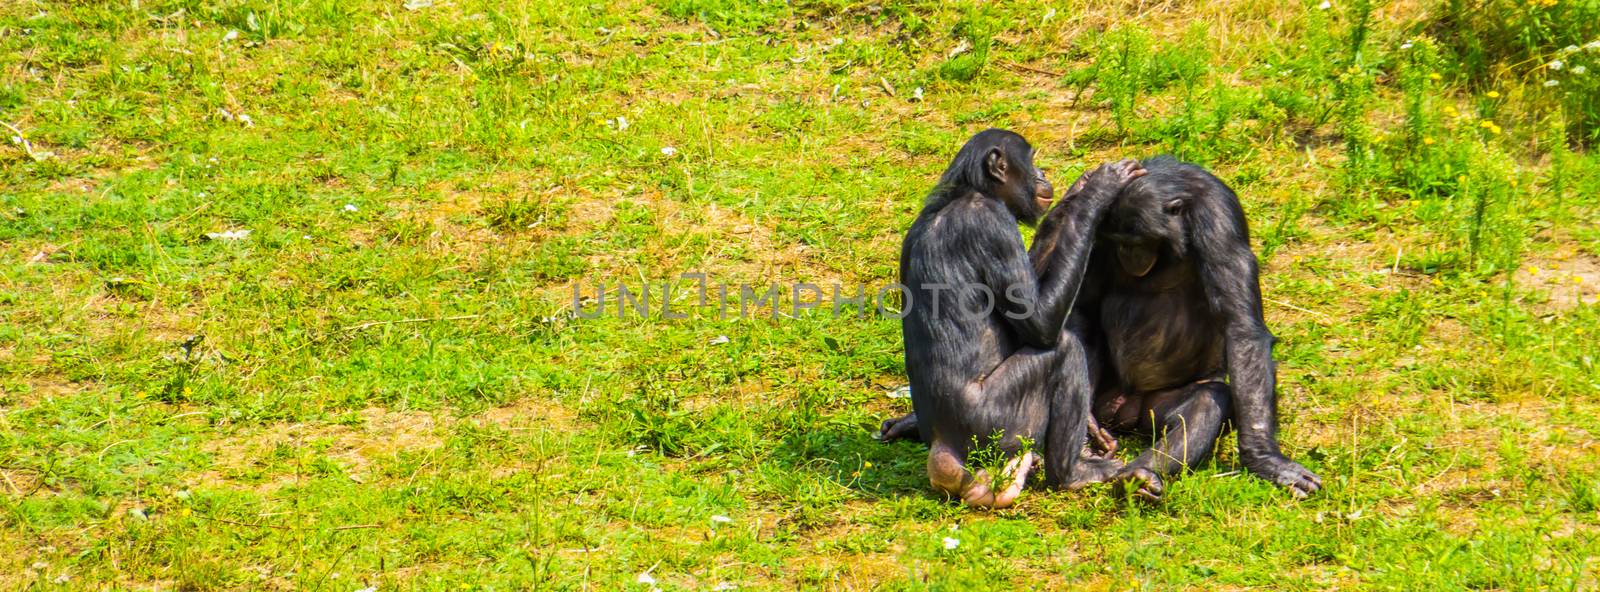 human apes grooming each other, bonbo couple, pygmy chimpanzees, social primate behavior, endangered animal specie from Africa by charlottebleijenberg